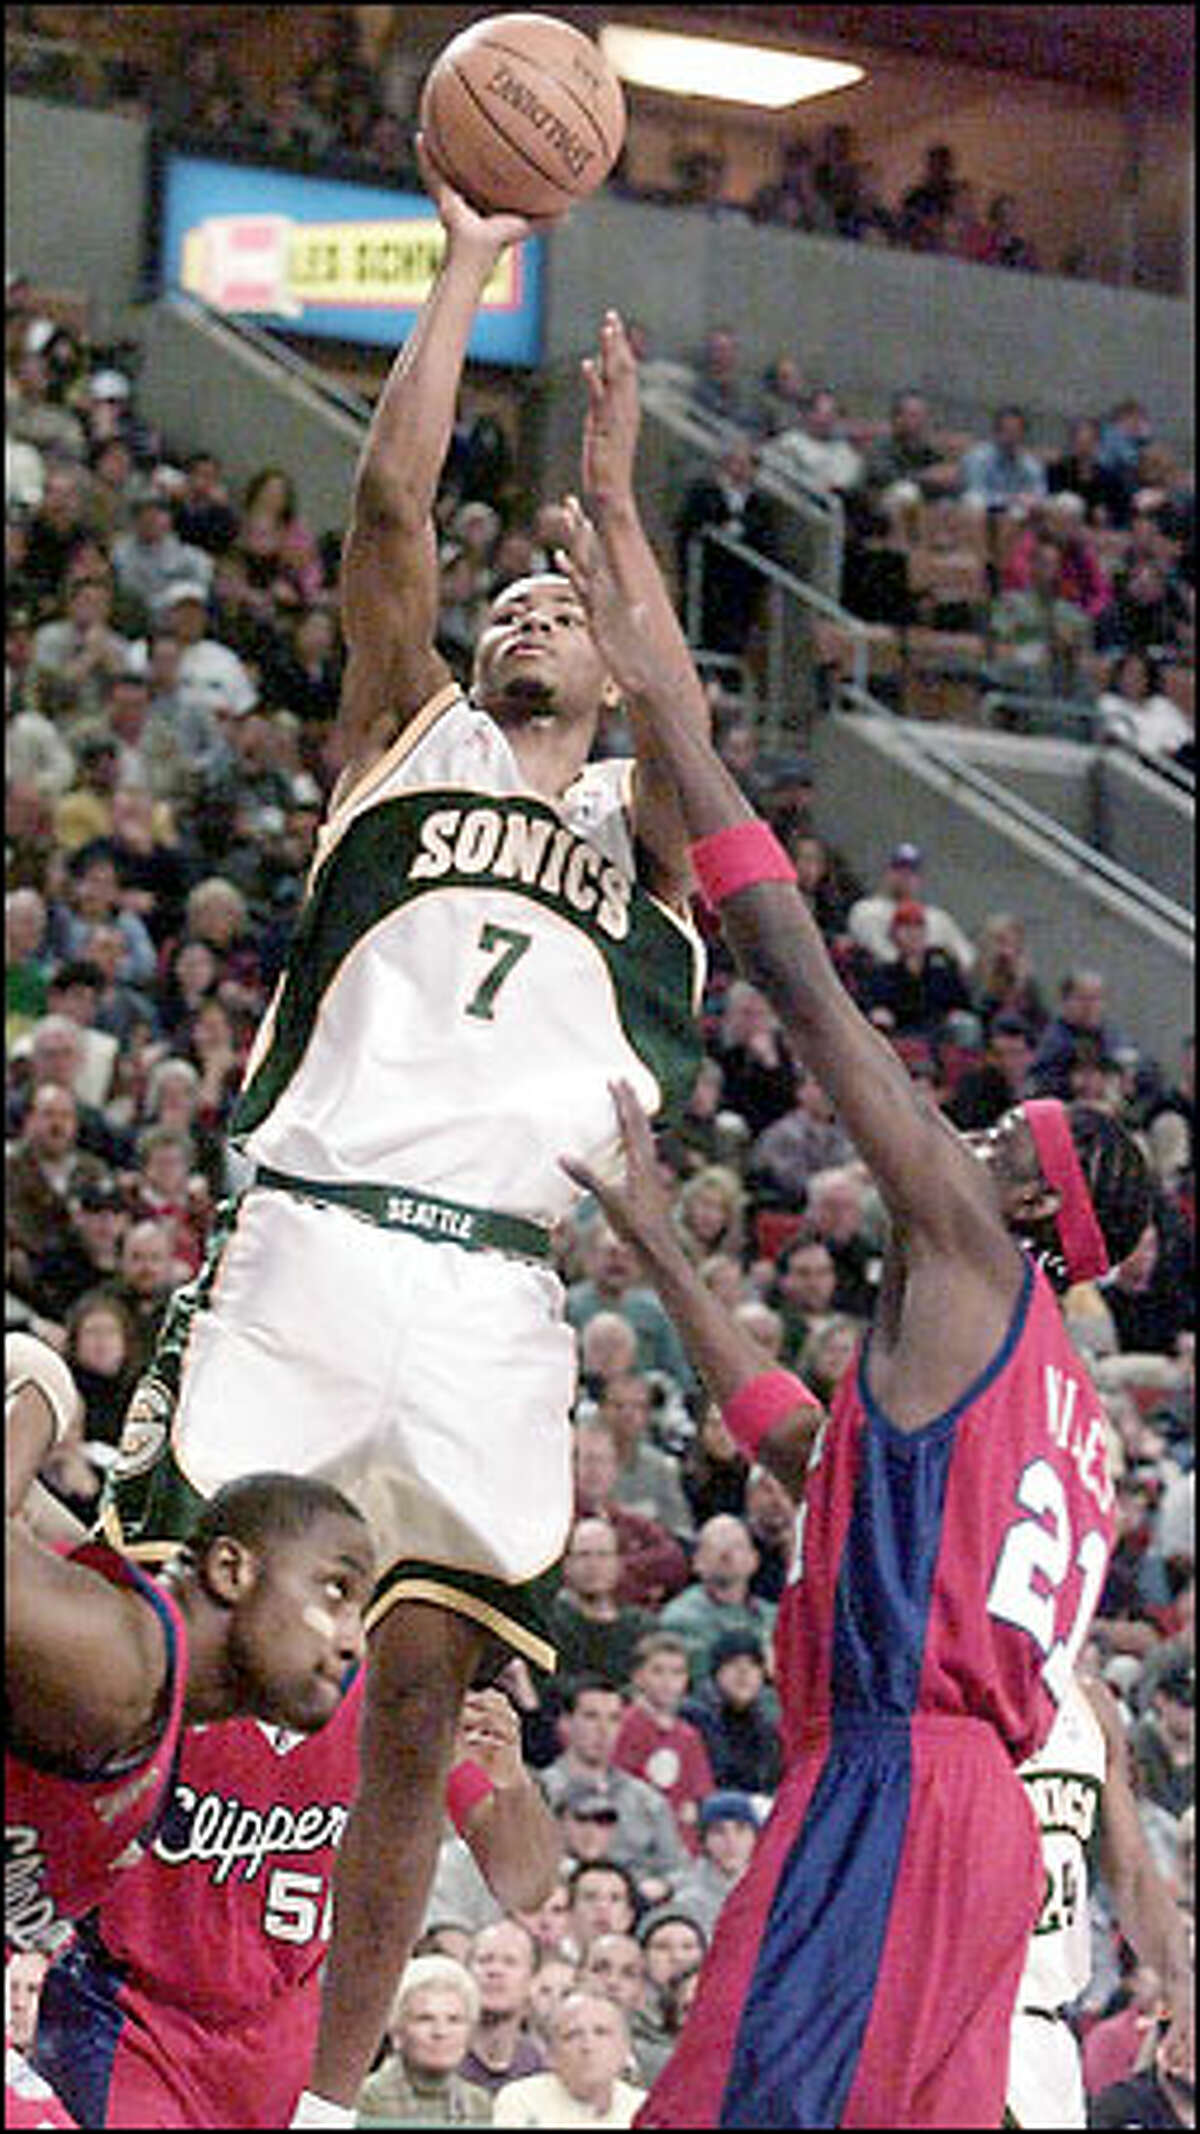 Sonics forward Rashard Lewis rises for a shot over the Clippers' Darius Miles. Lewis is shooting 46.4 percent from the field.